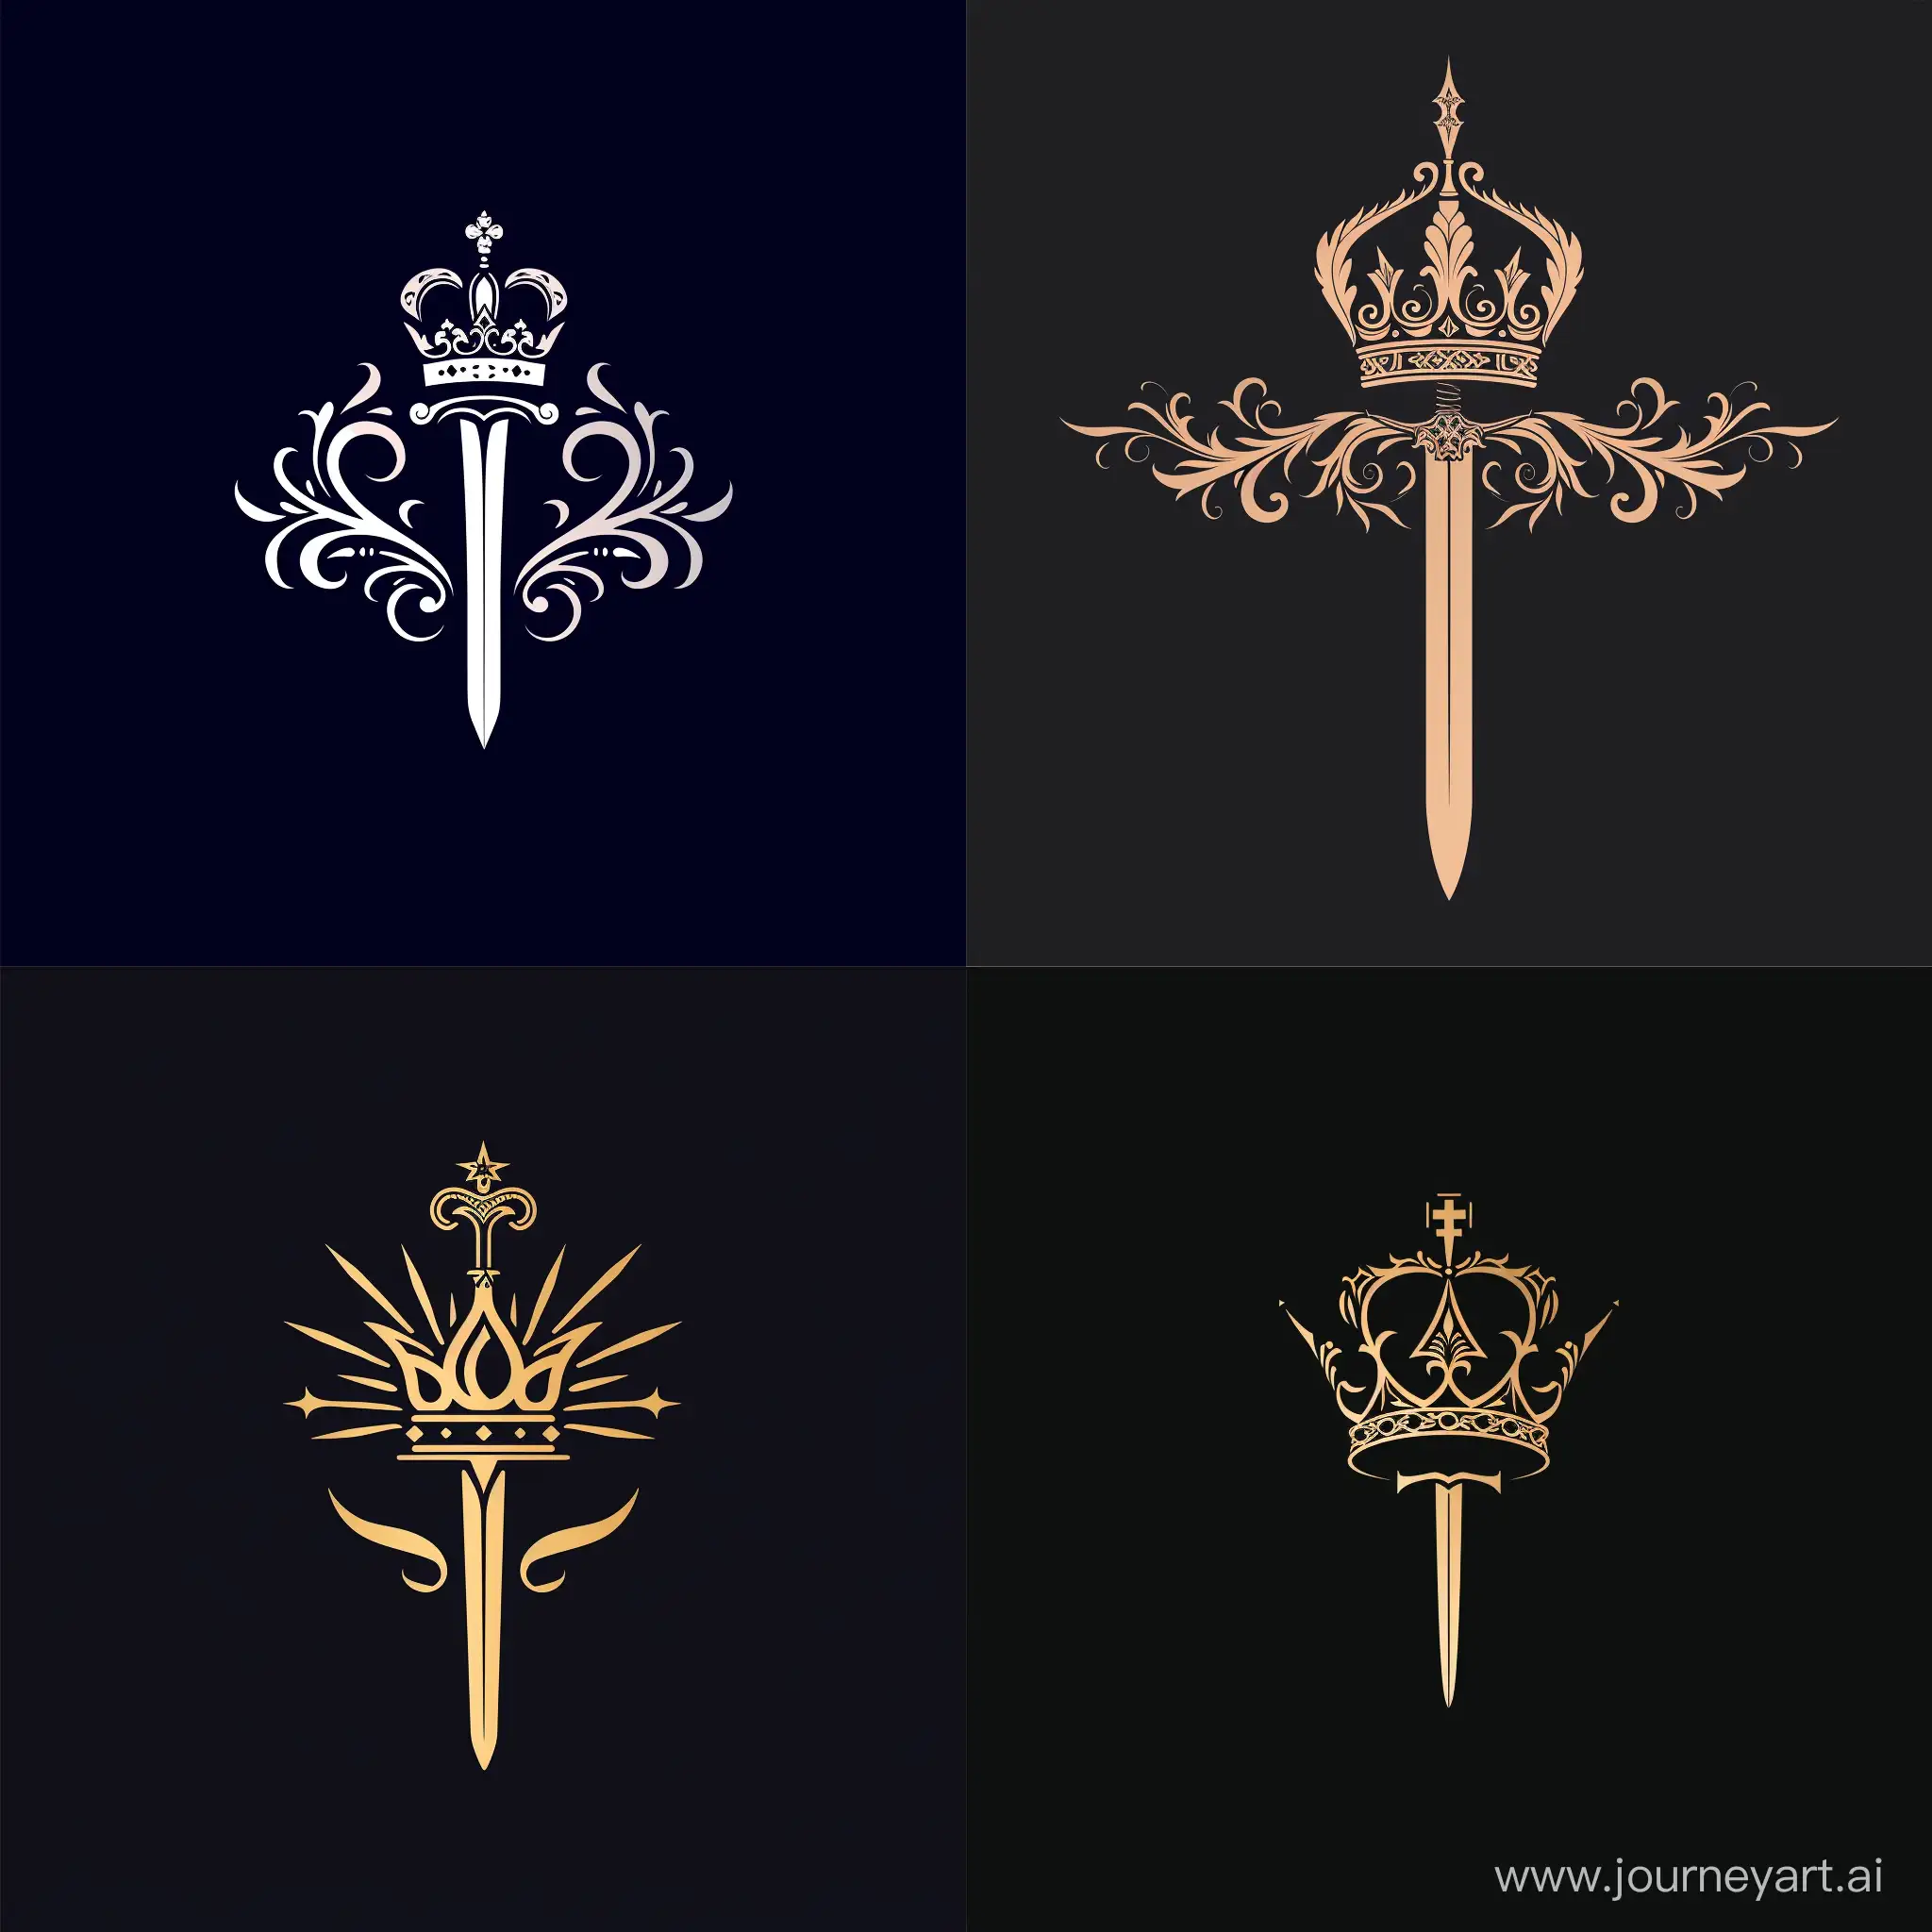 Minimalist logo with The sword in the crown